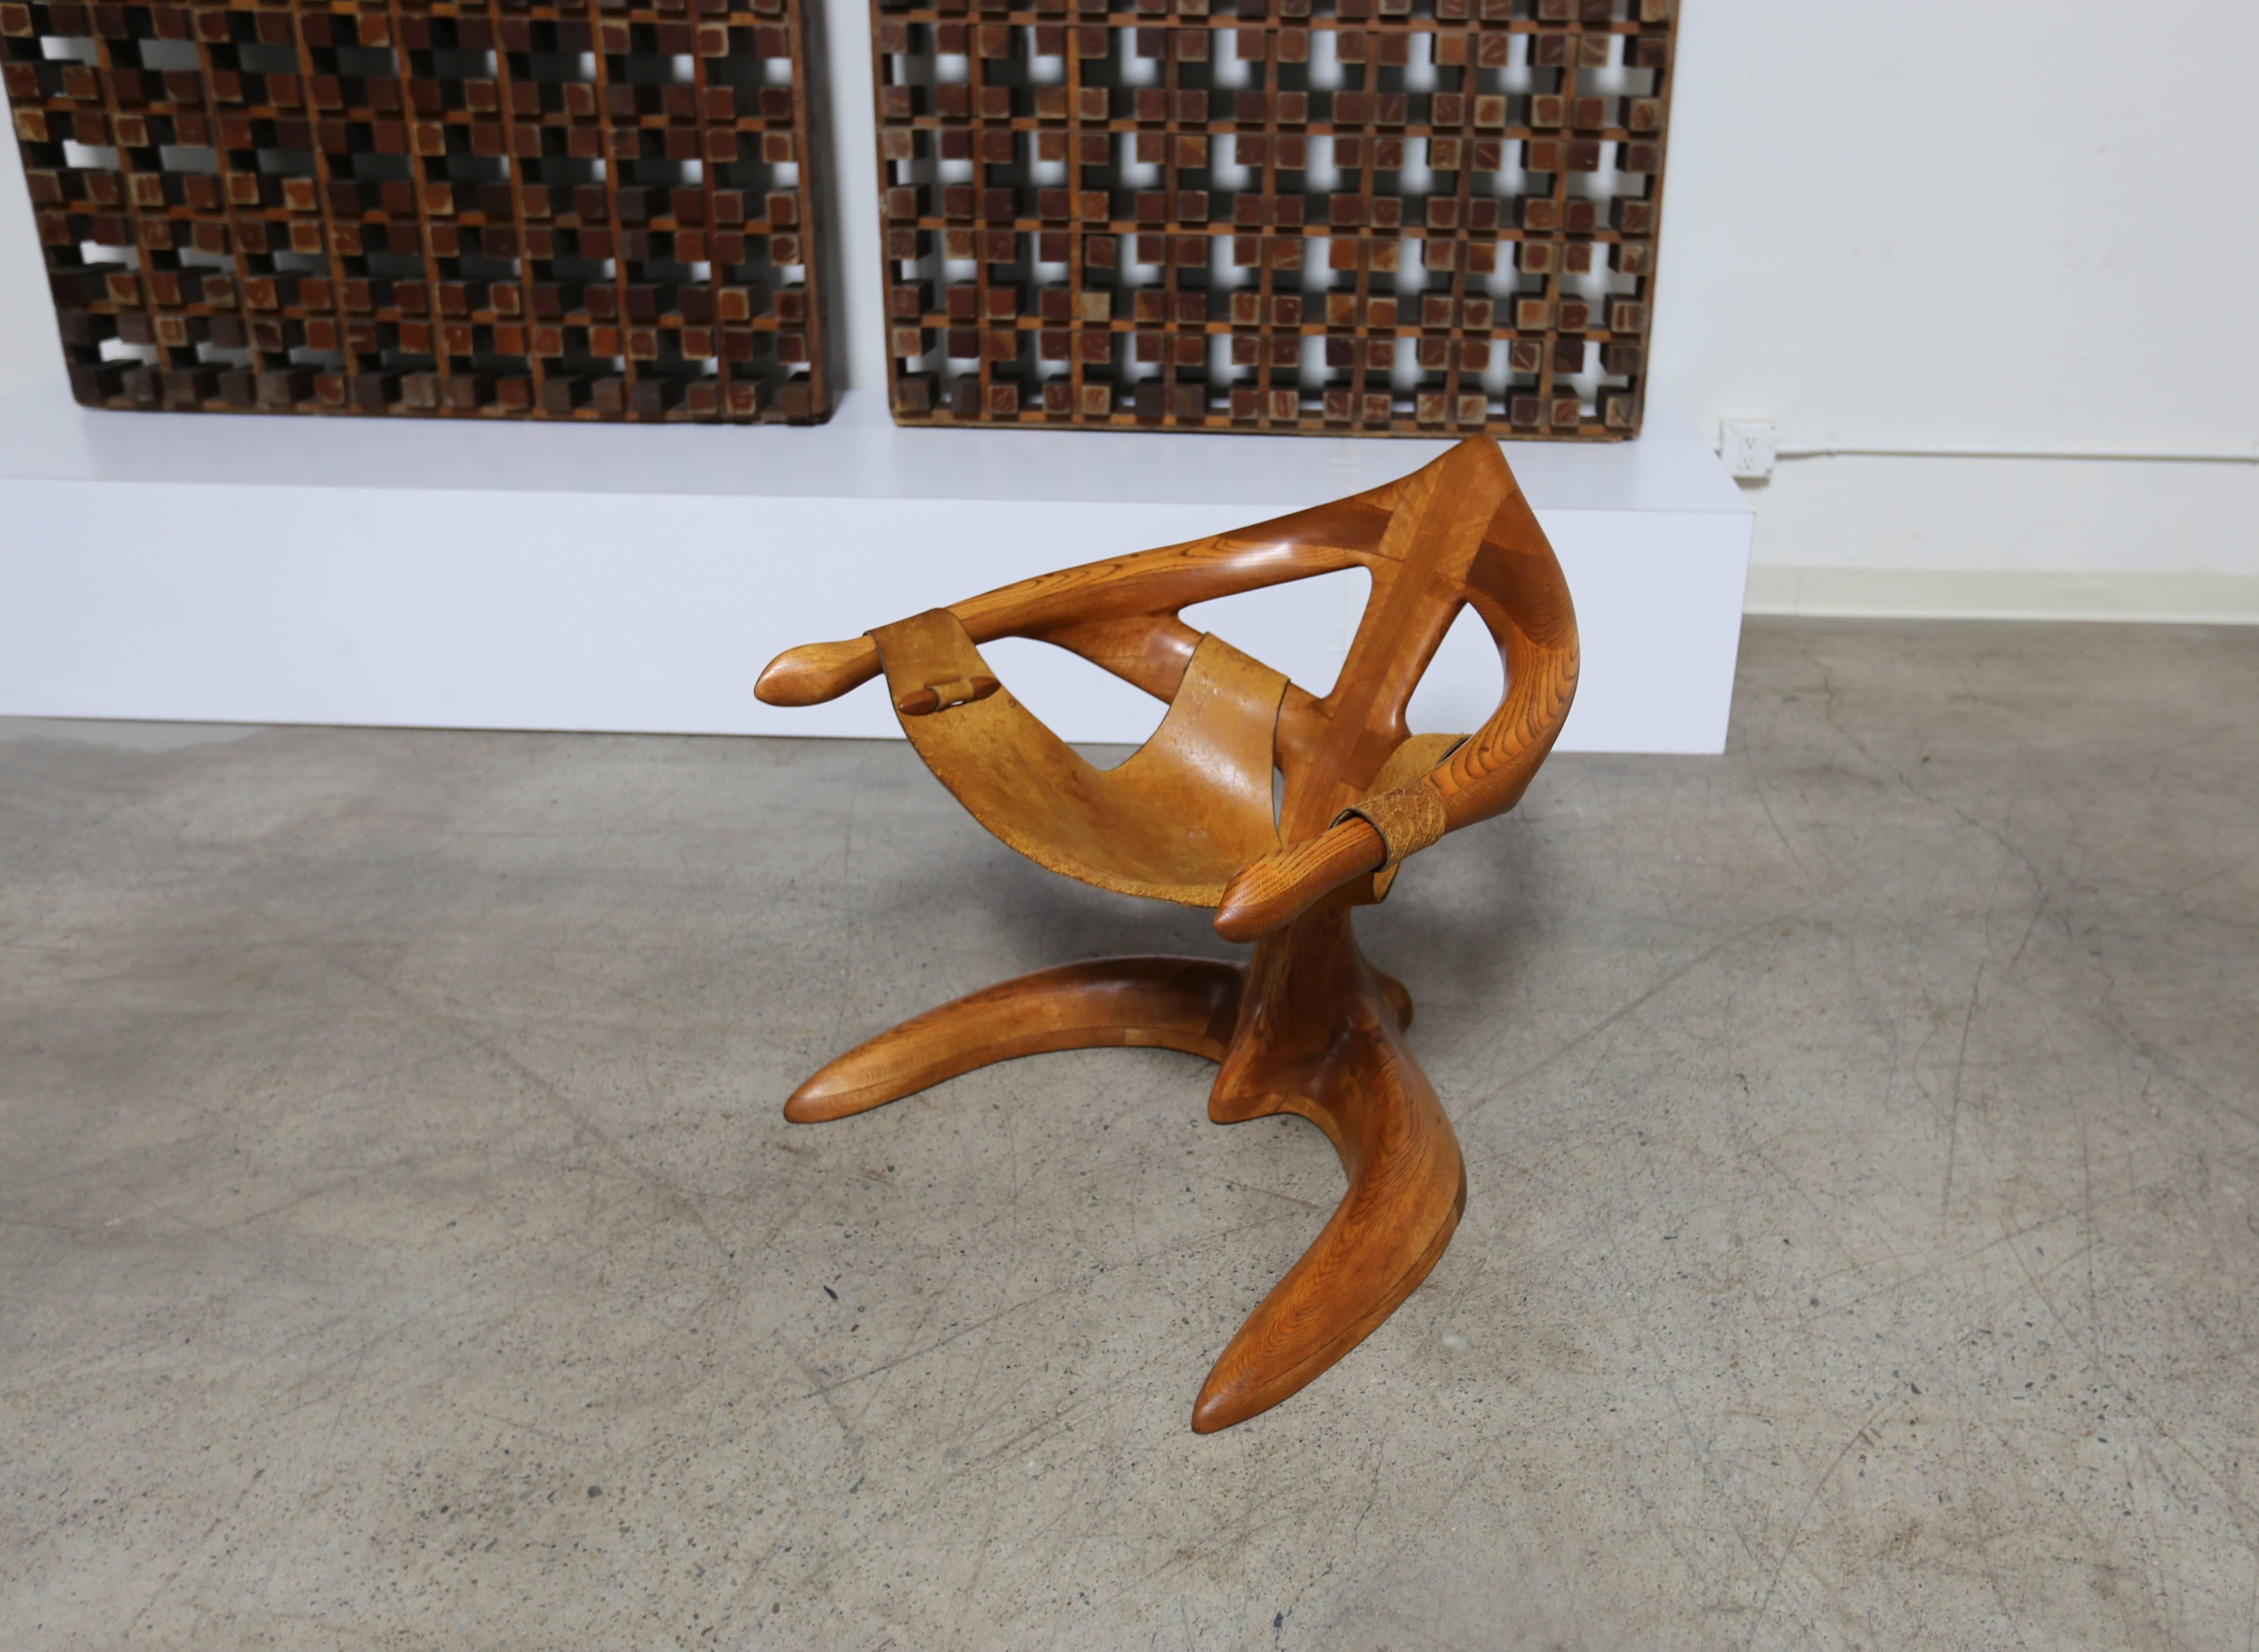 Mid-Century Modern Studio Crafted Lounge Chair by Californian Woodworker Tim Crowder = MOVING SALE!